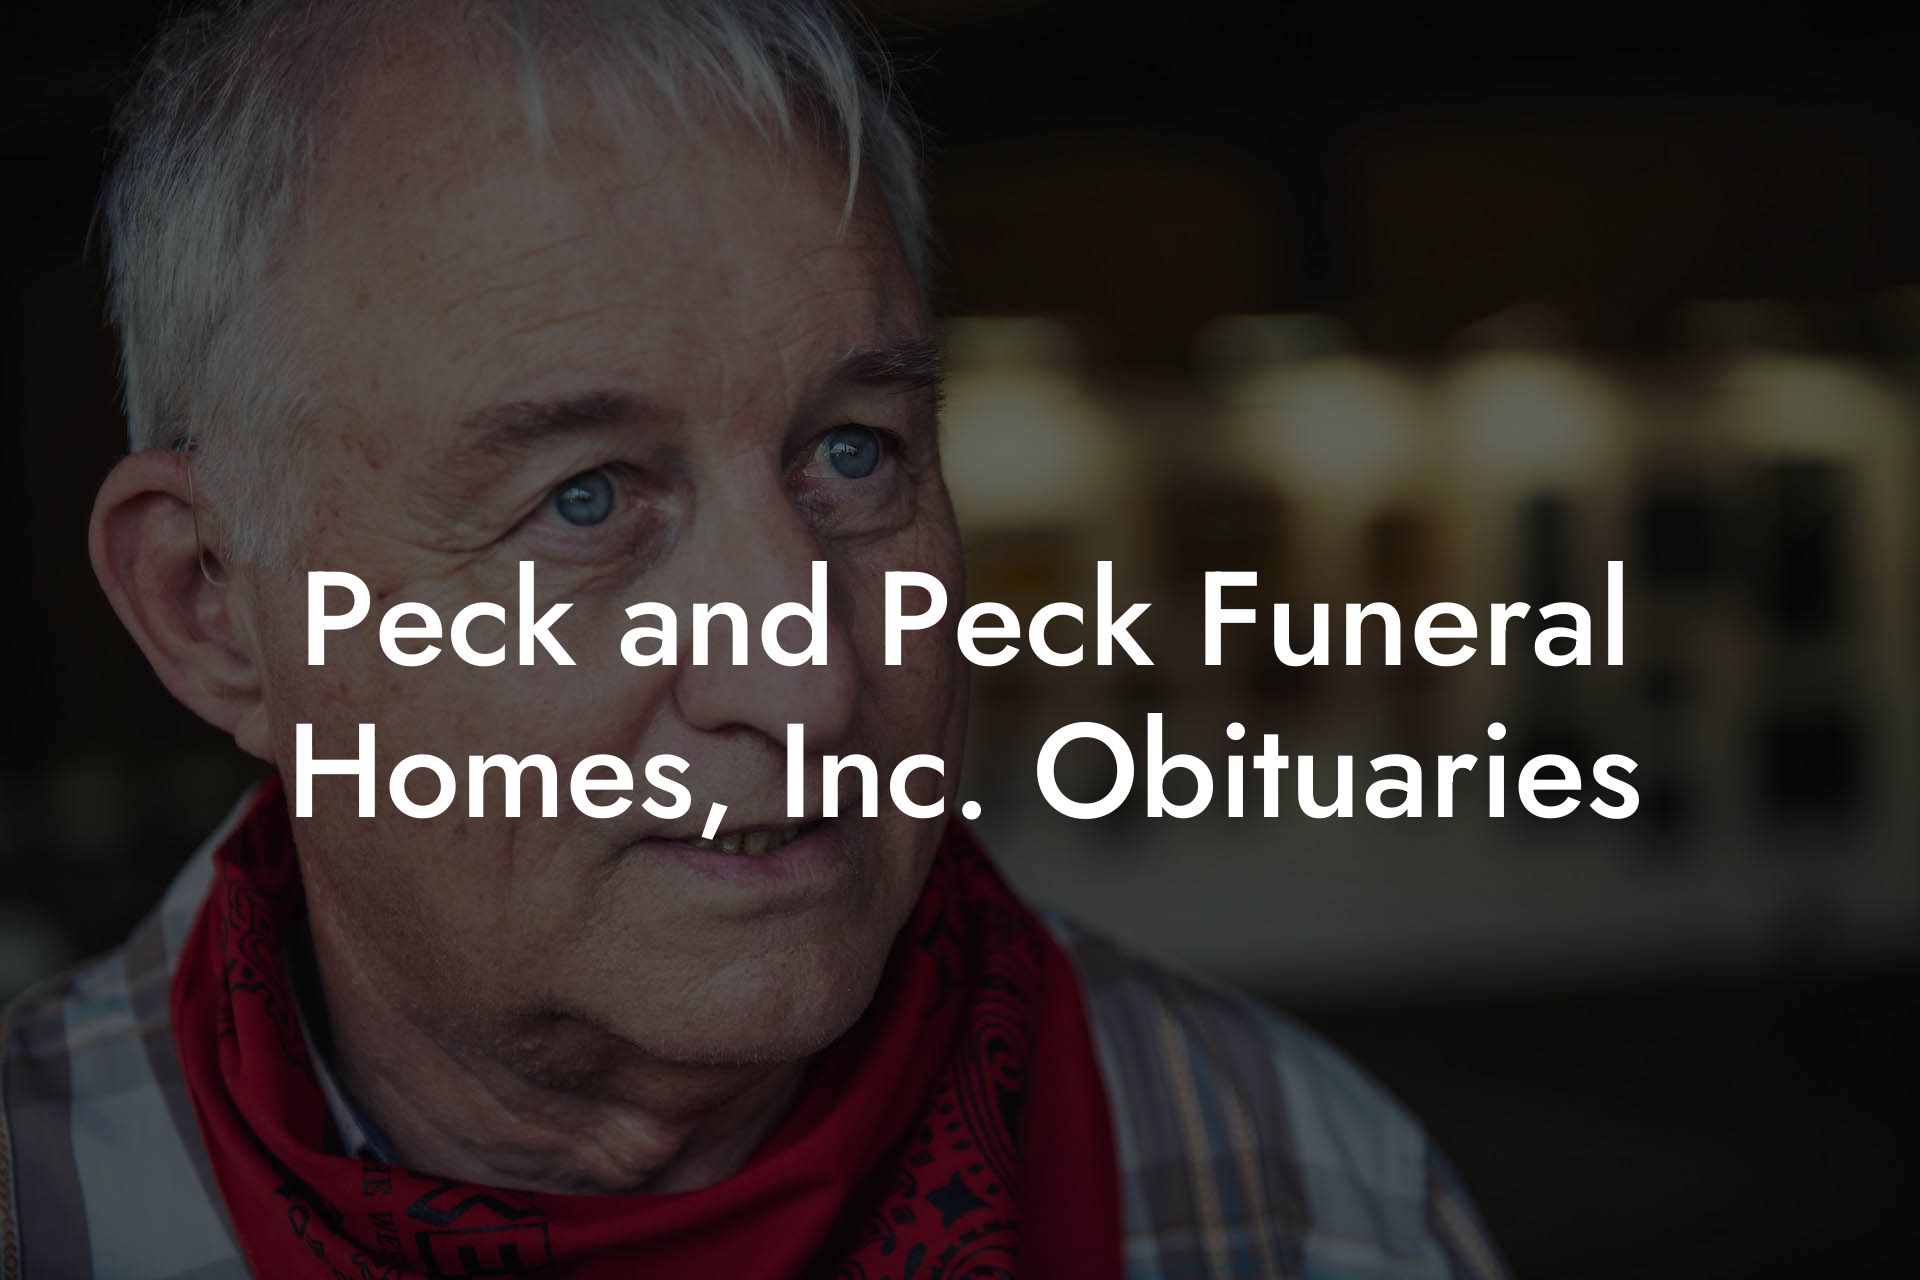 Peck and Peck Funeral Homes, Inc. Obituaries